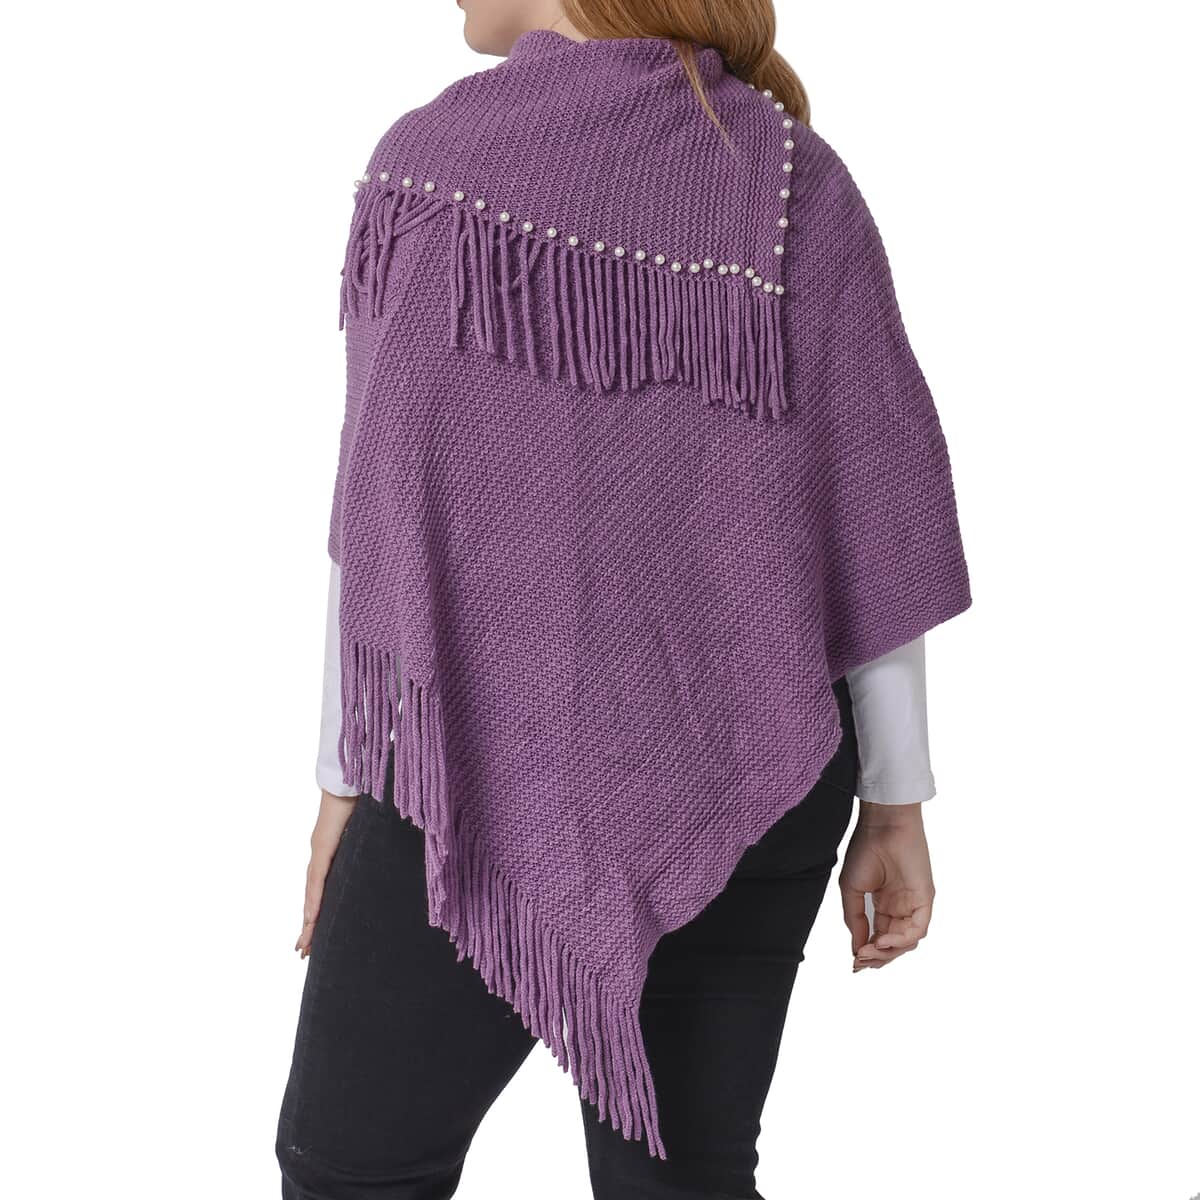 Value Buy Black Cape Neck V-Shape Poncho with Pearls and Fringe Accent (One Size Fits Most, 100% Acrylic) image number 1